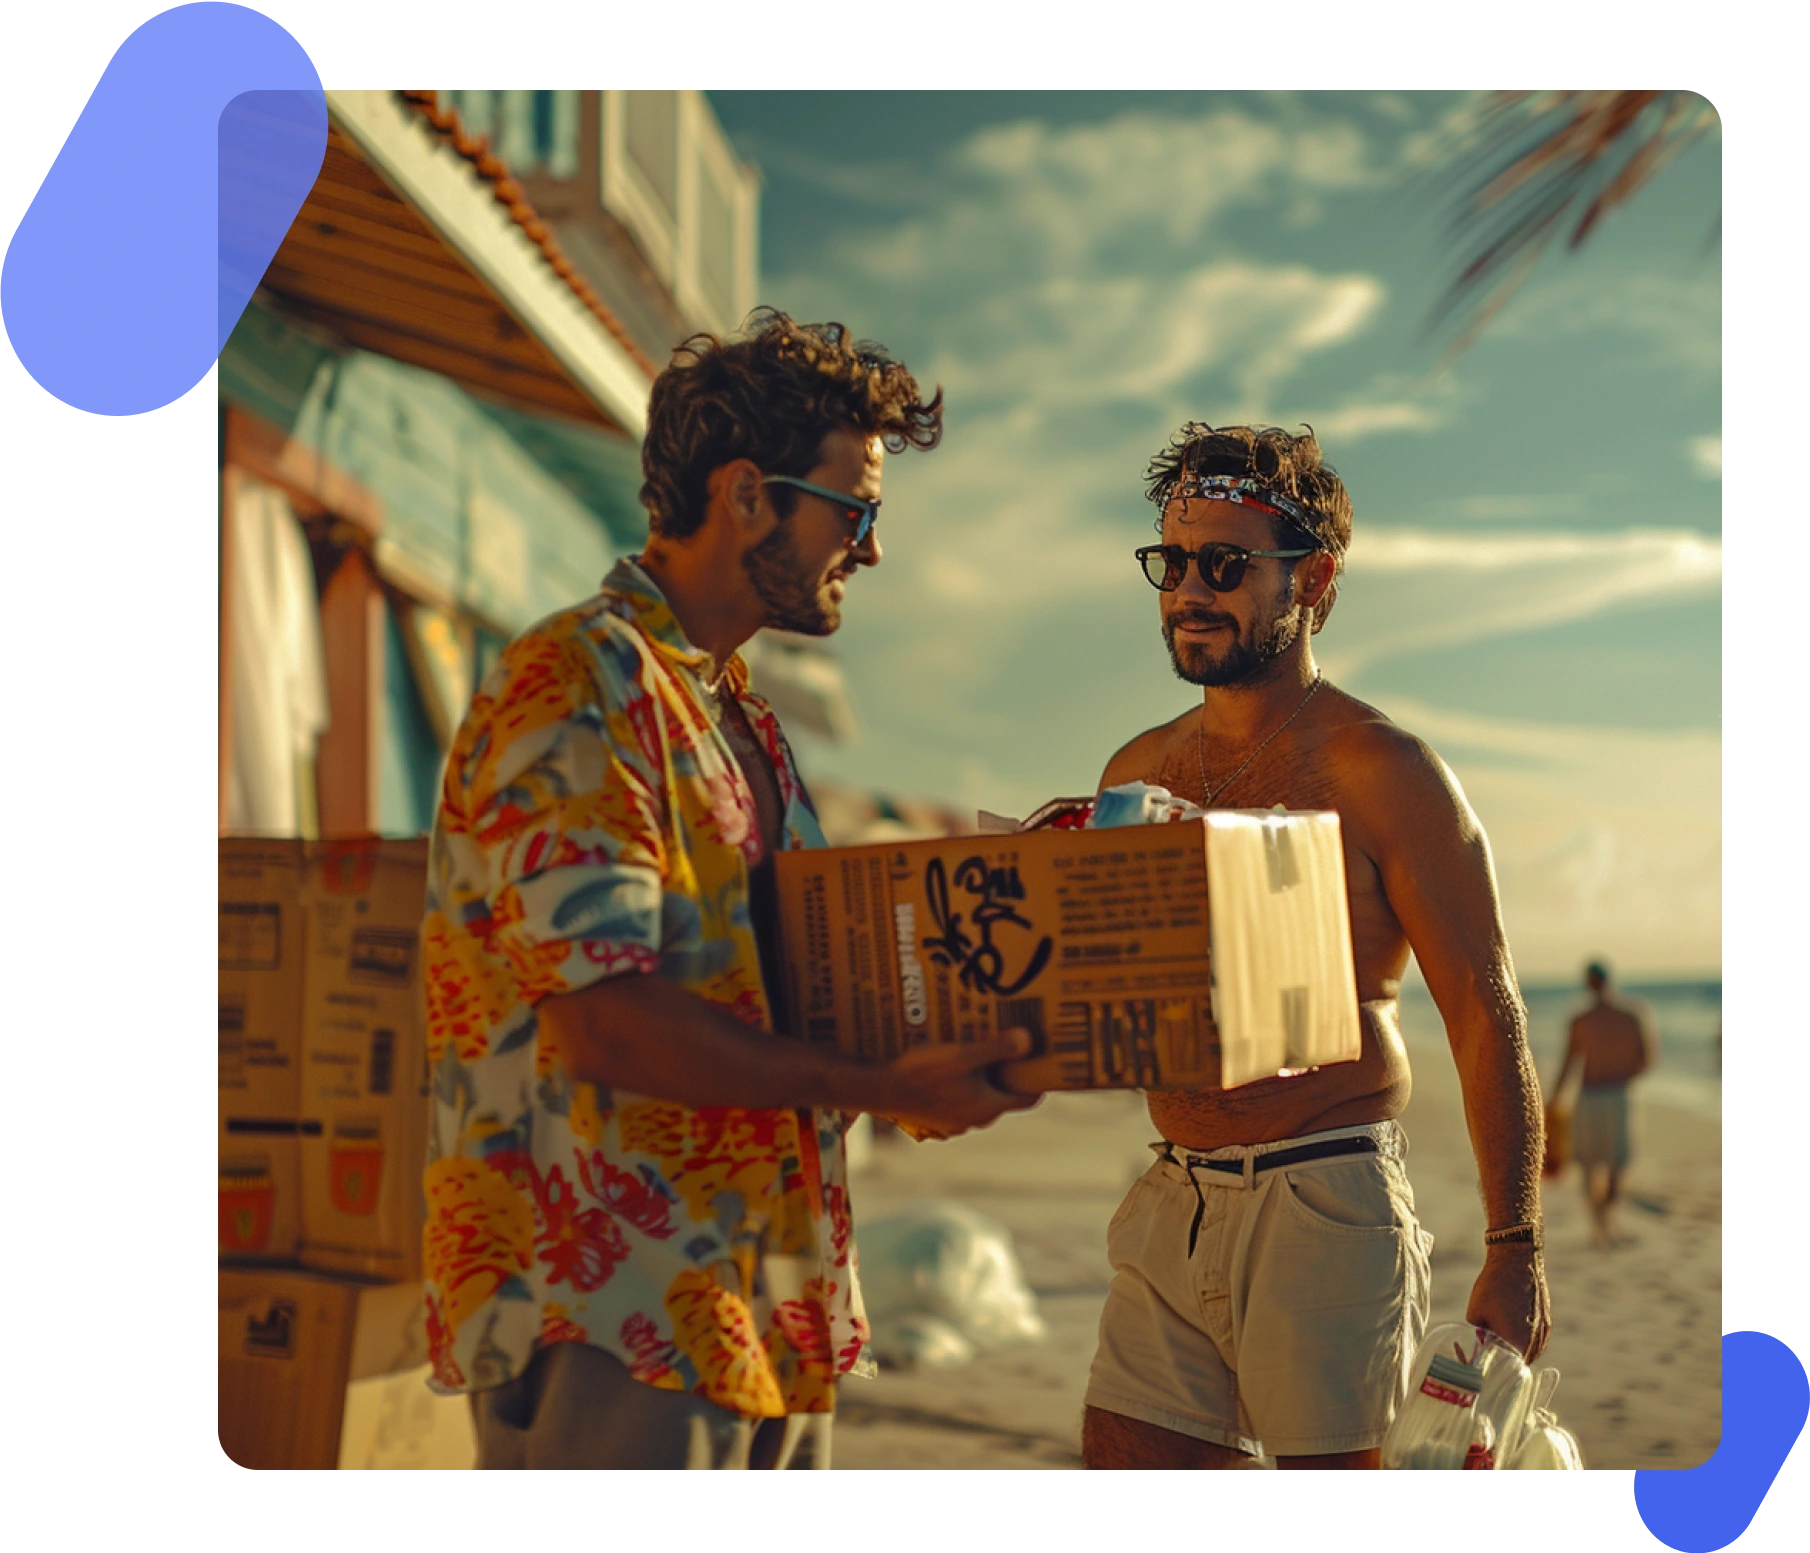 Two men at the beach, one holding a box.